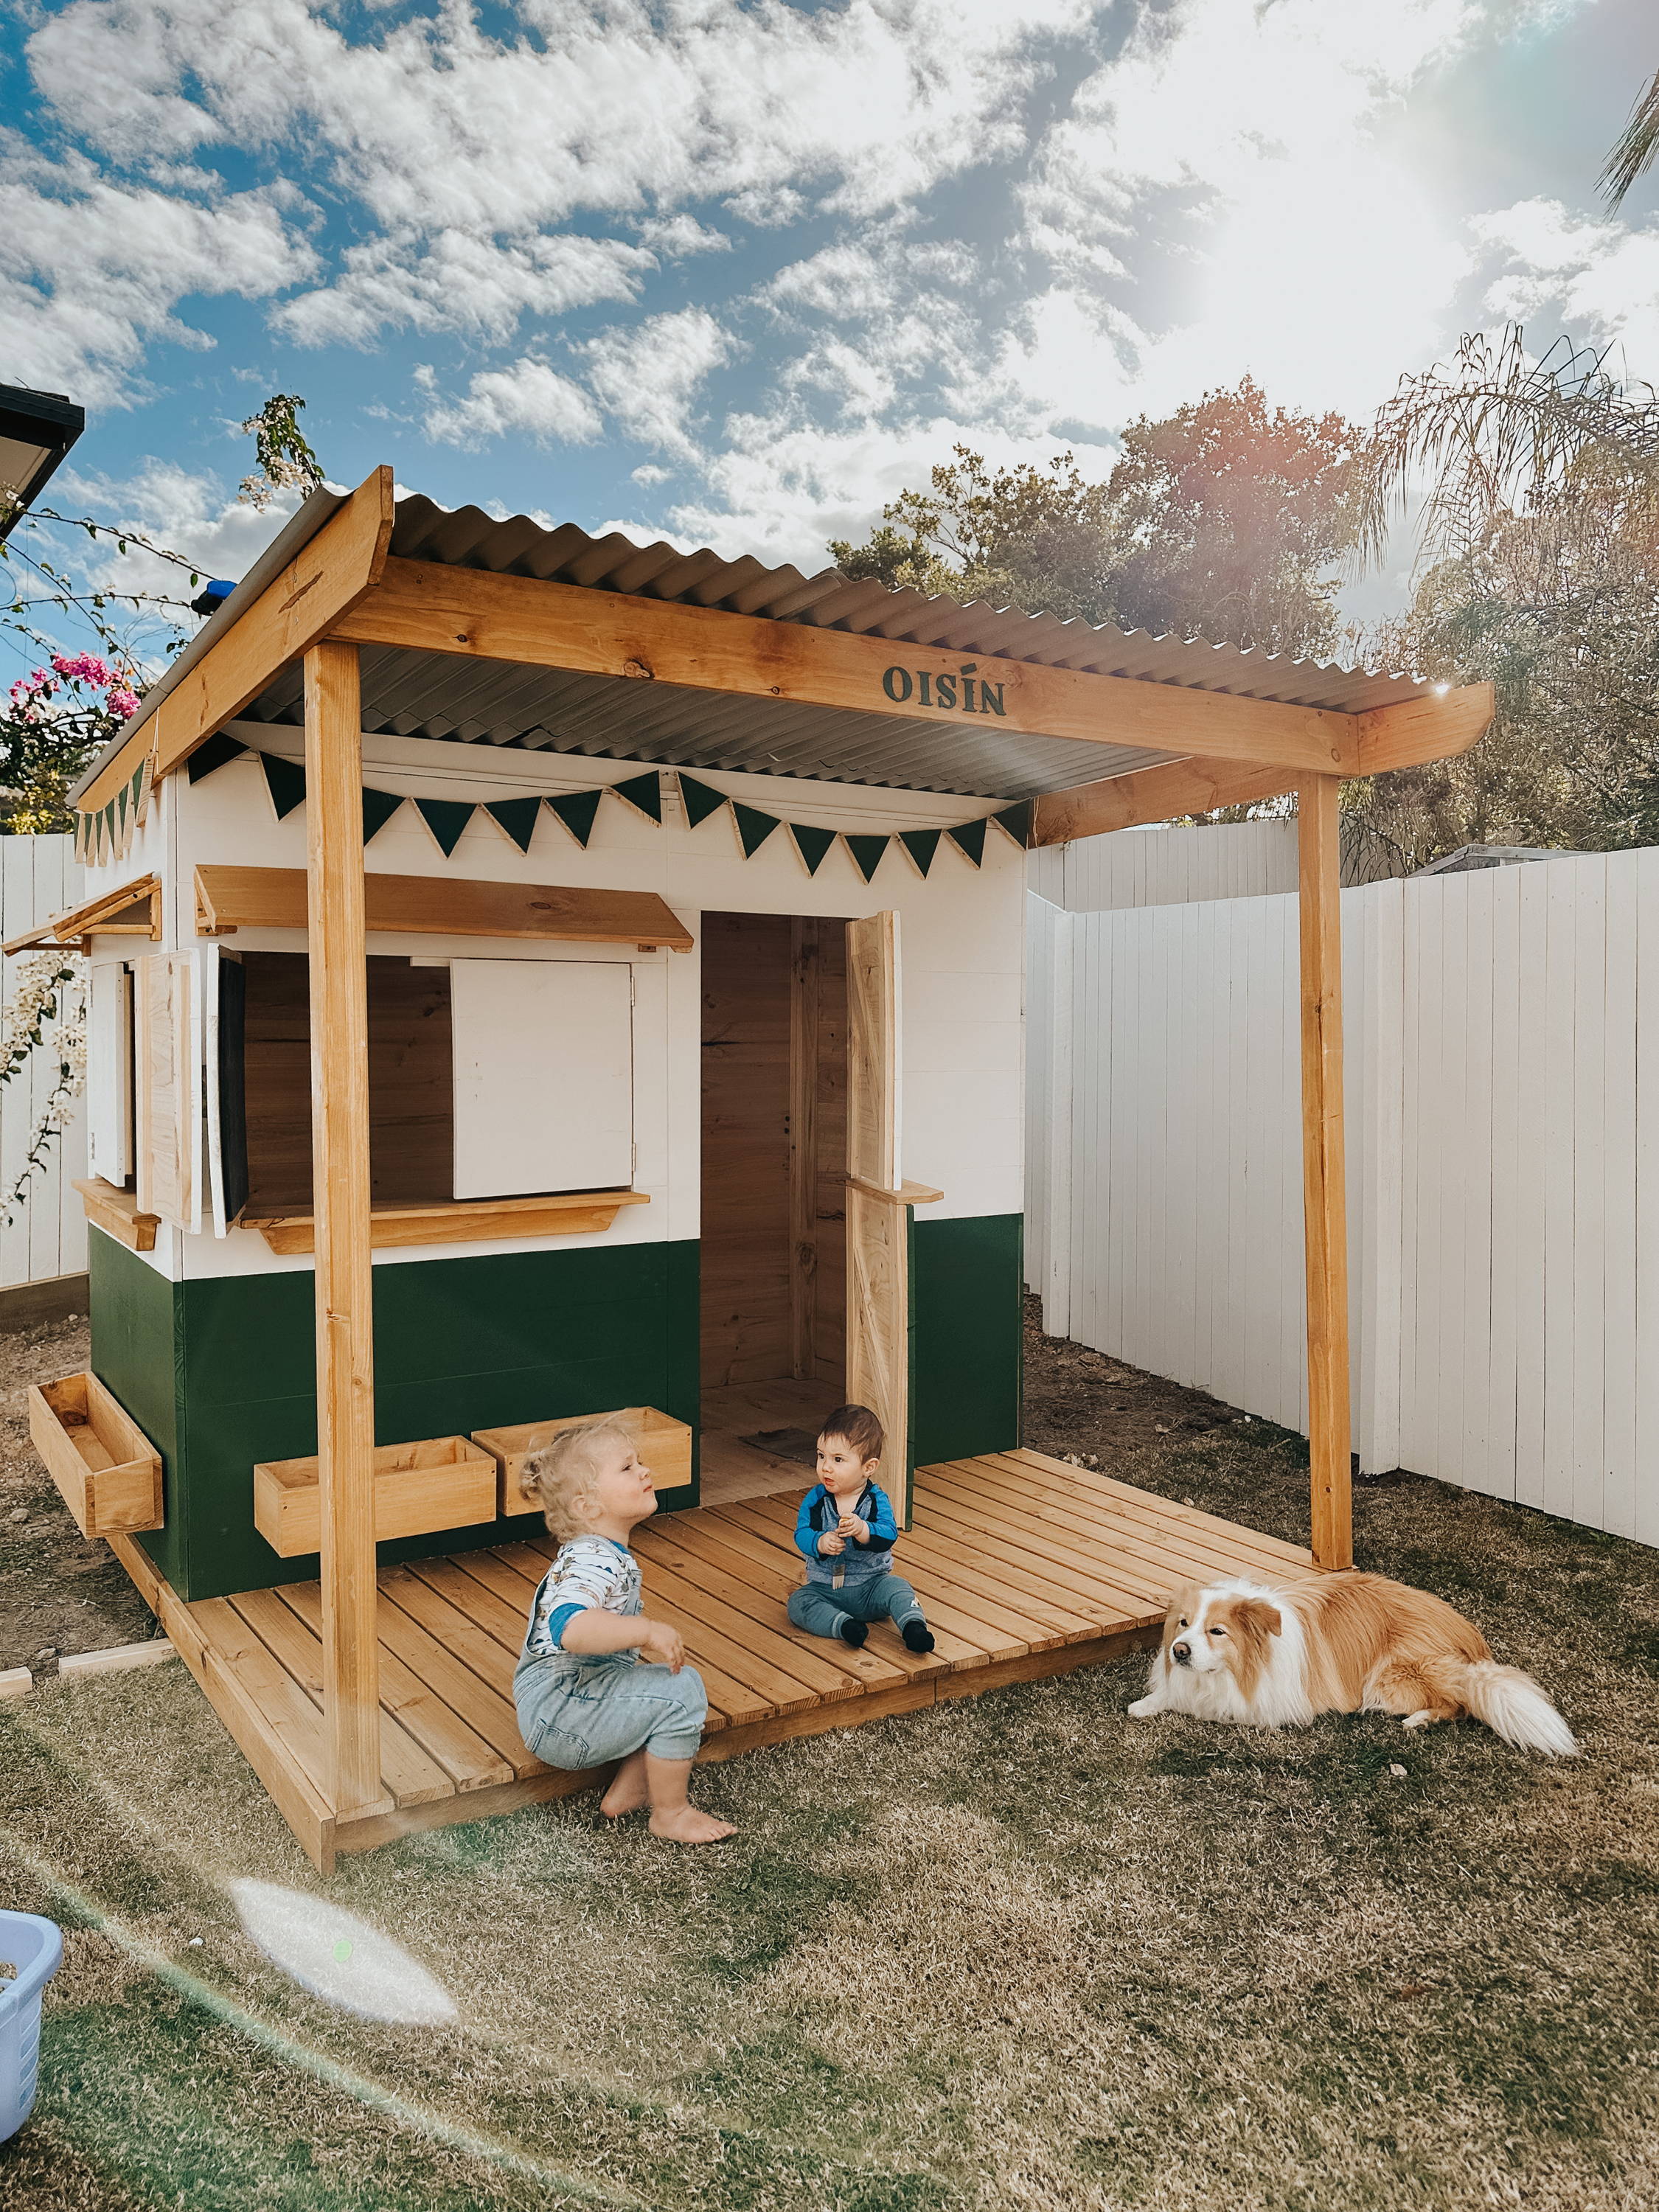 A extended cubby house with kids and a dog